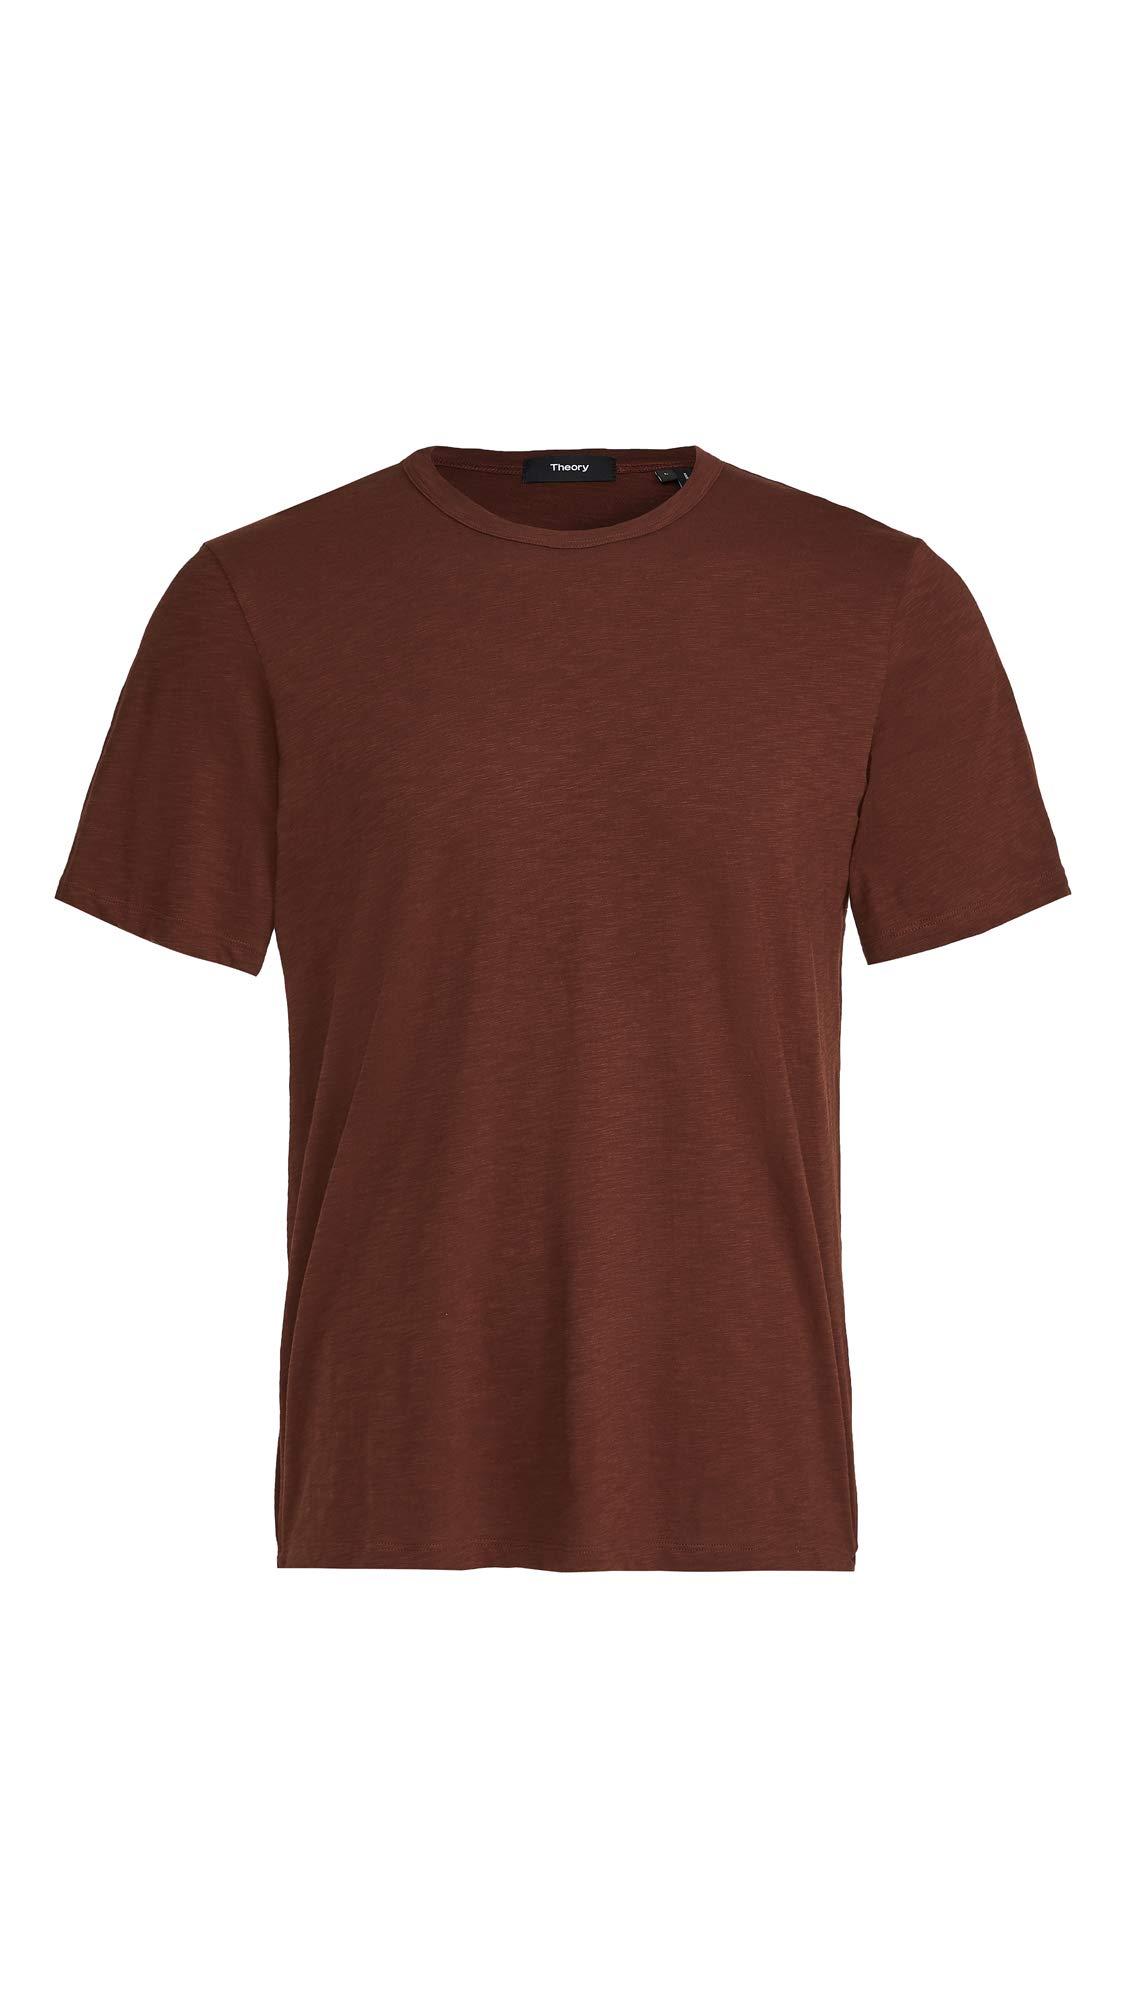 Theory Cotton Essential Cosmo T-shirt in Brown for Men - Lyst